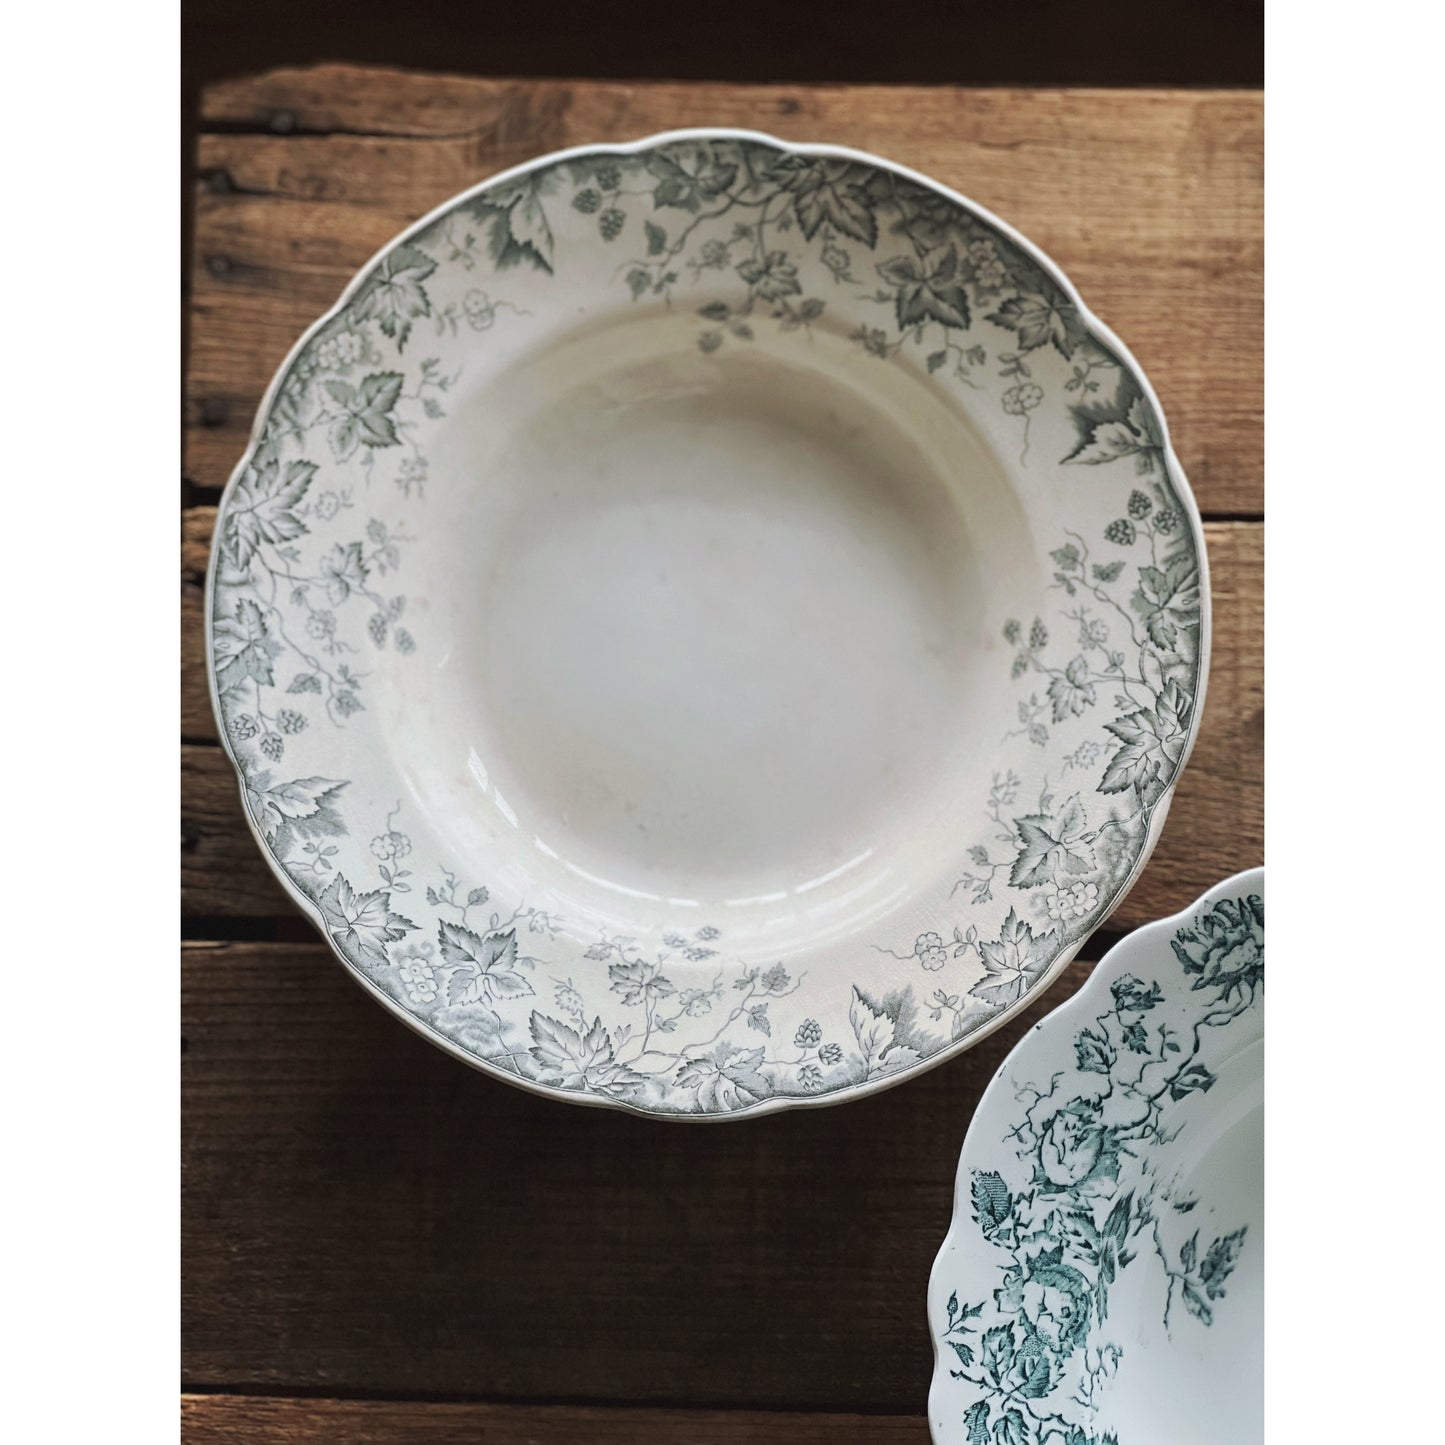 Curated Set of 4 Transferware Soup Bowls